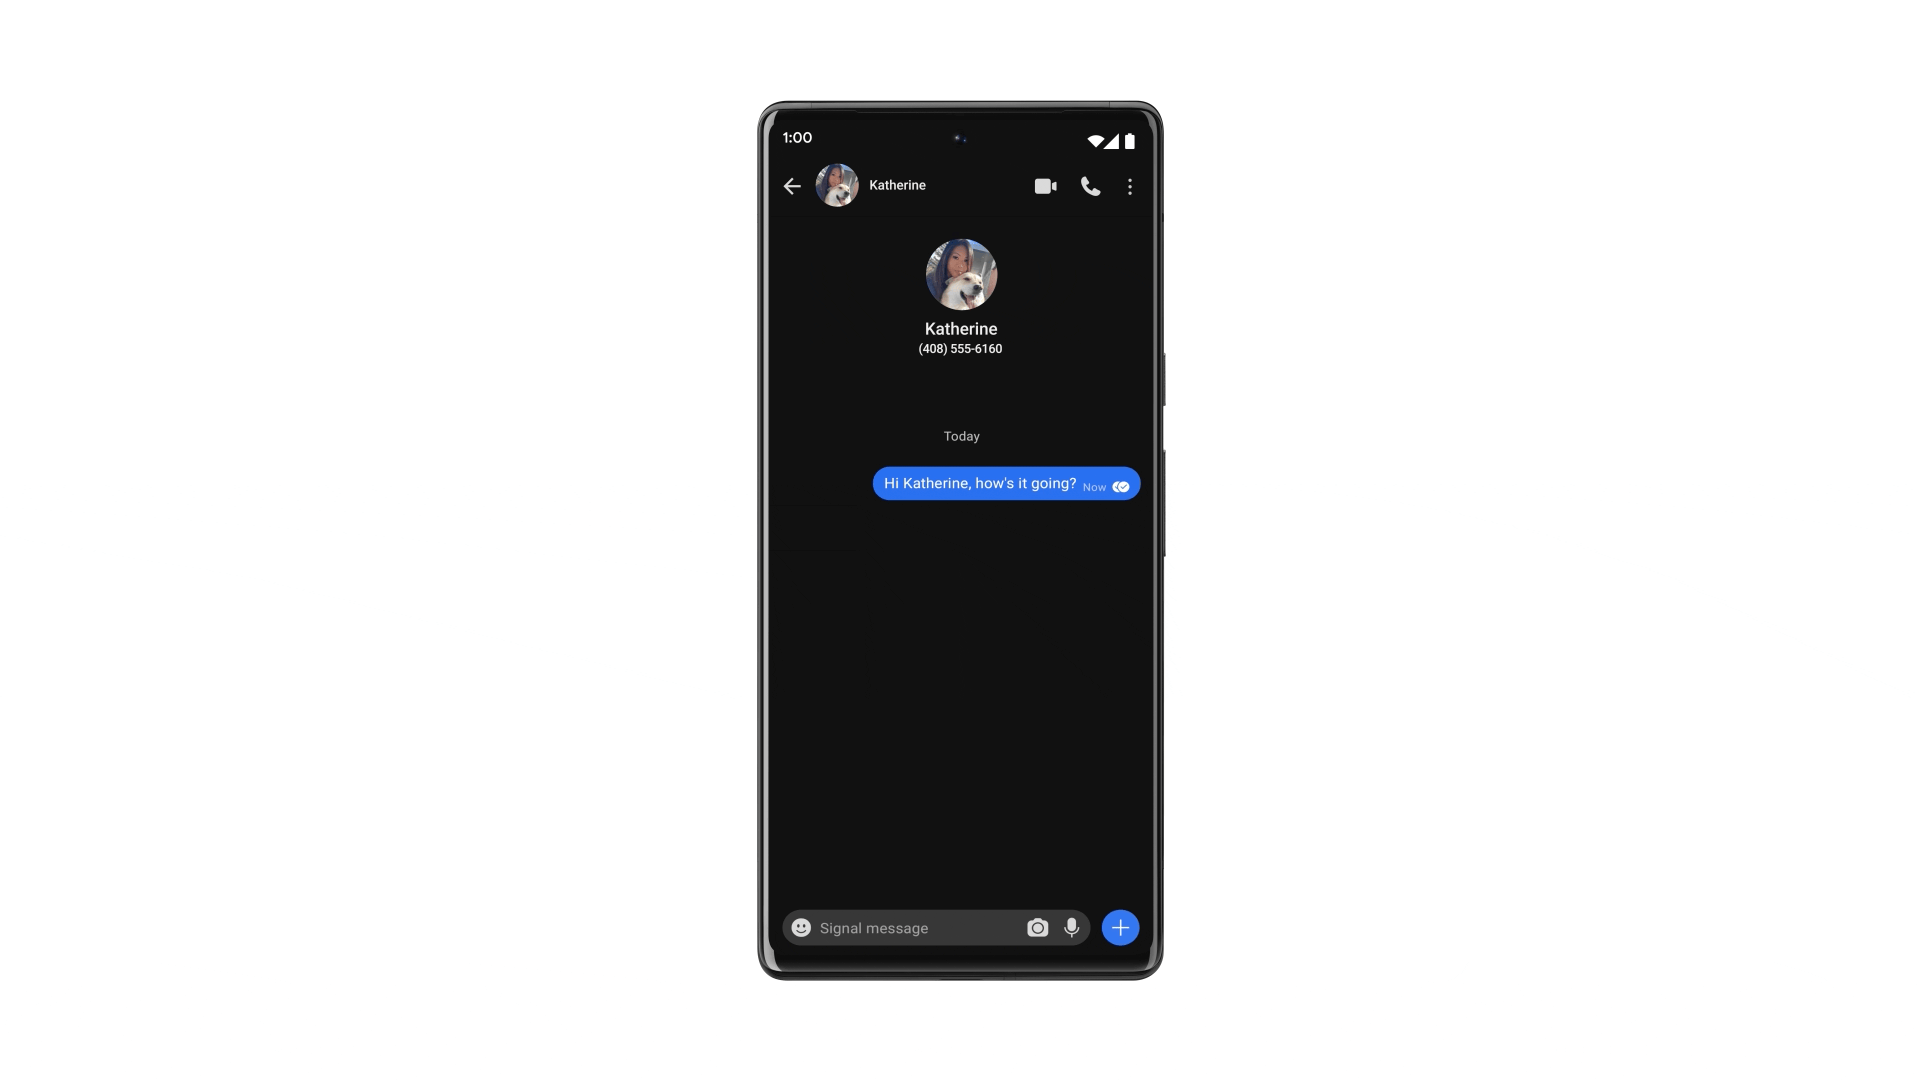 A phone sending a chat message, with the replies appearing on a laptop for responding and continuing the conversation